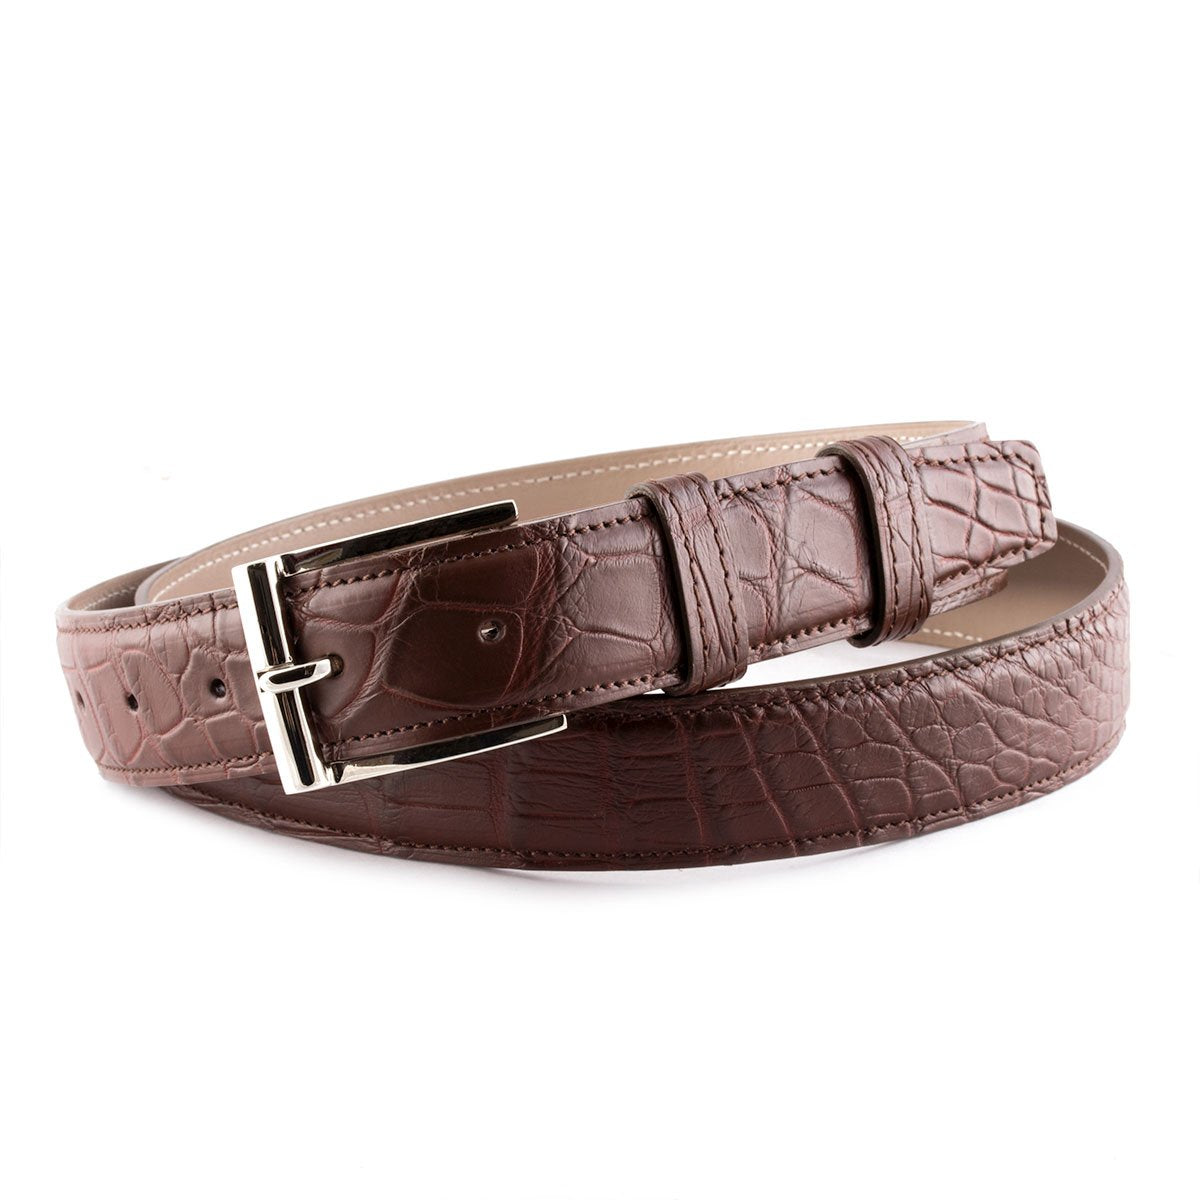 Classic leather belt with polished golden H buckle - Alligator – ABP  Concept